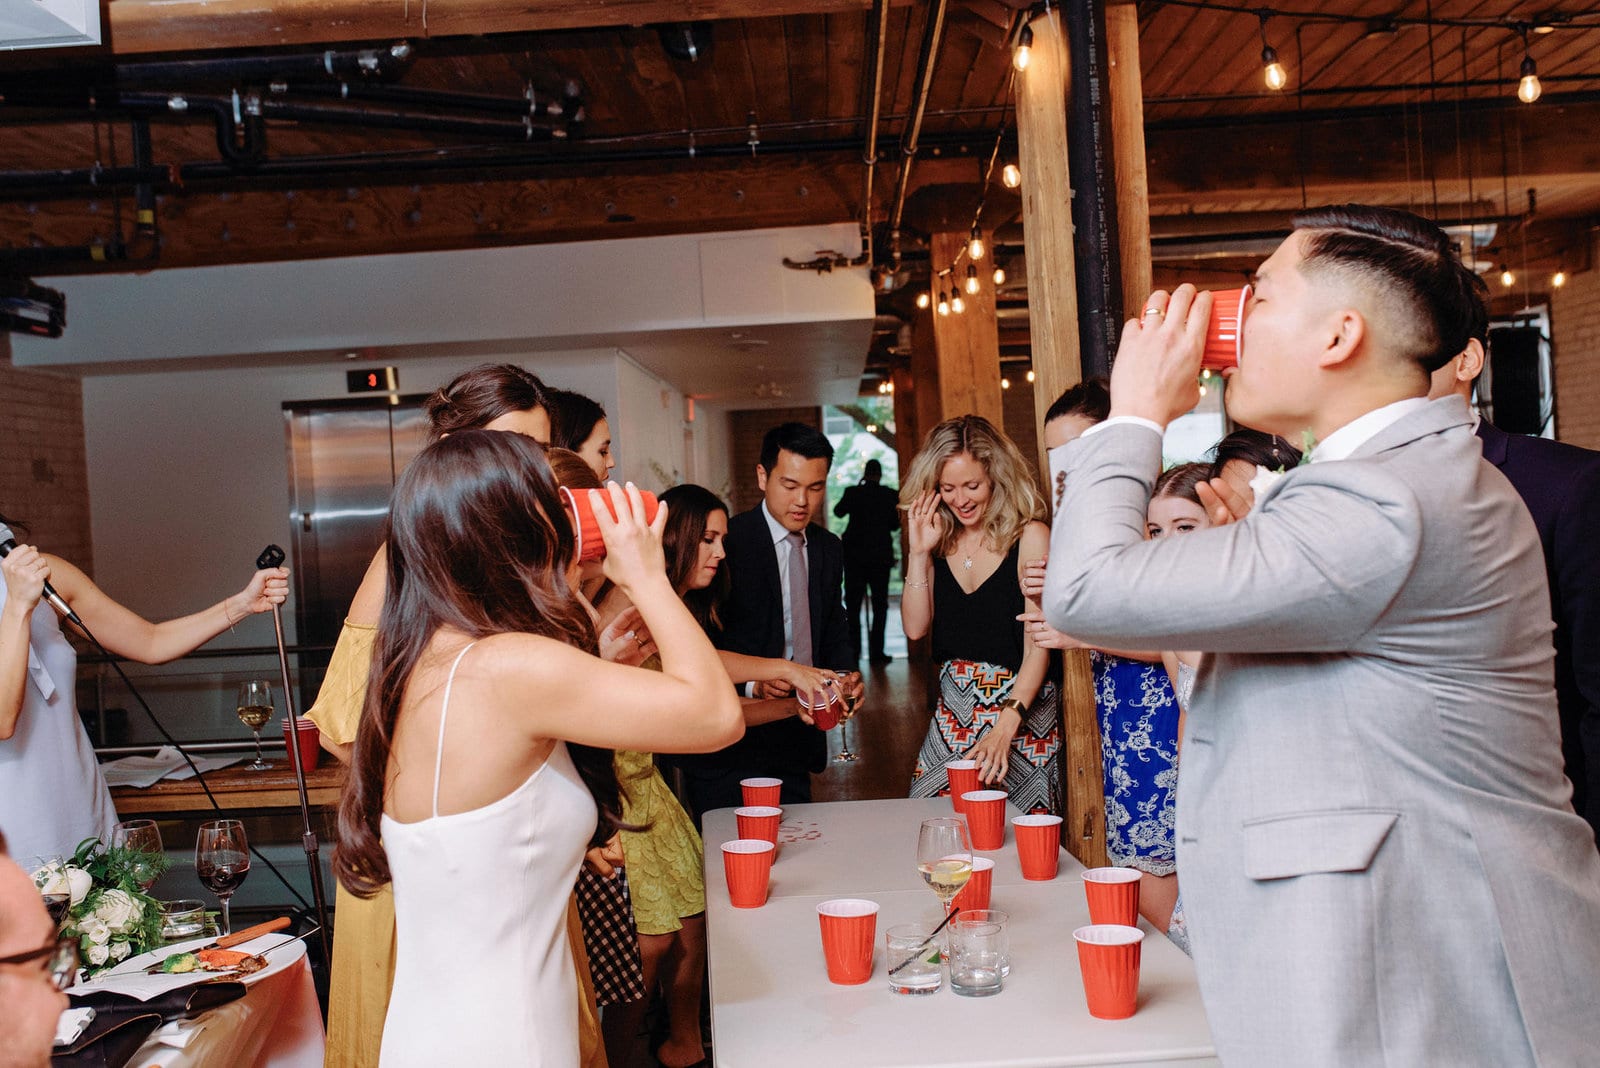 Bride and Groom Flip Cup Spontaneous Fun Game During Reception at Hotel Ocho Downtown Toronto Wedding Photographer Jacqueline James Photography